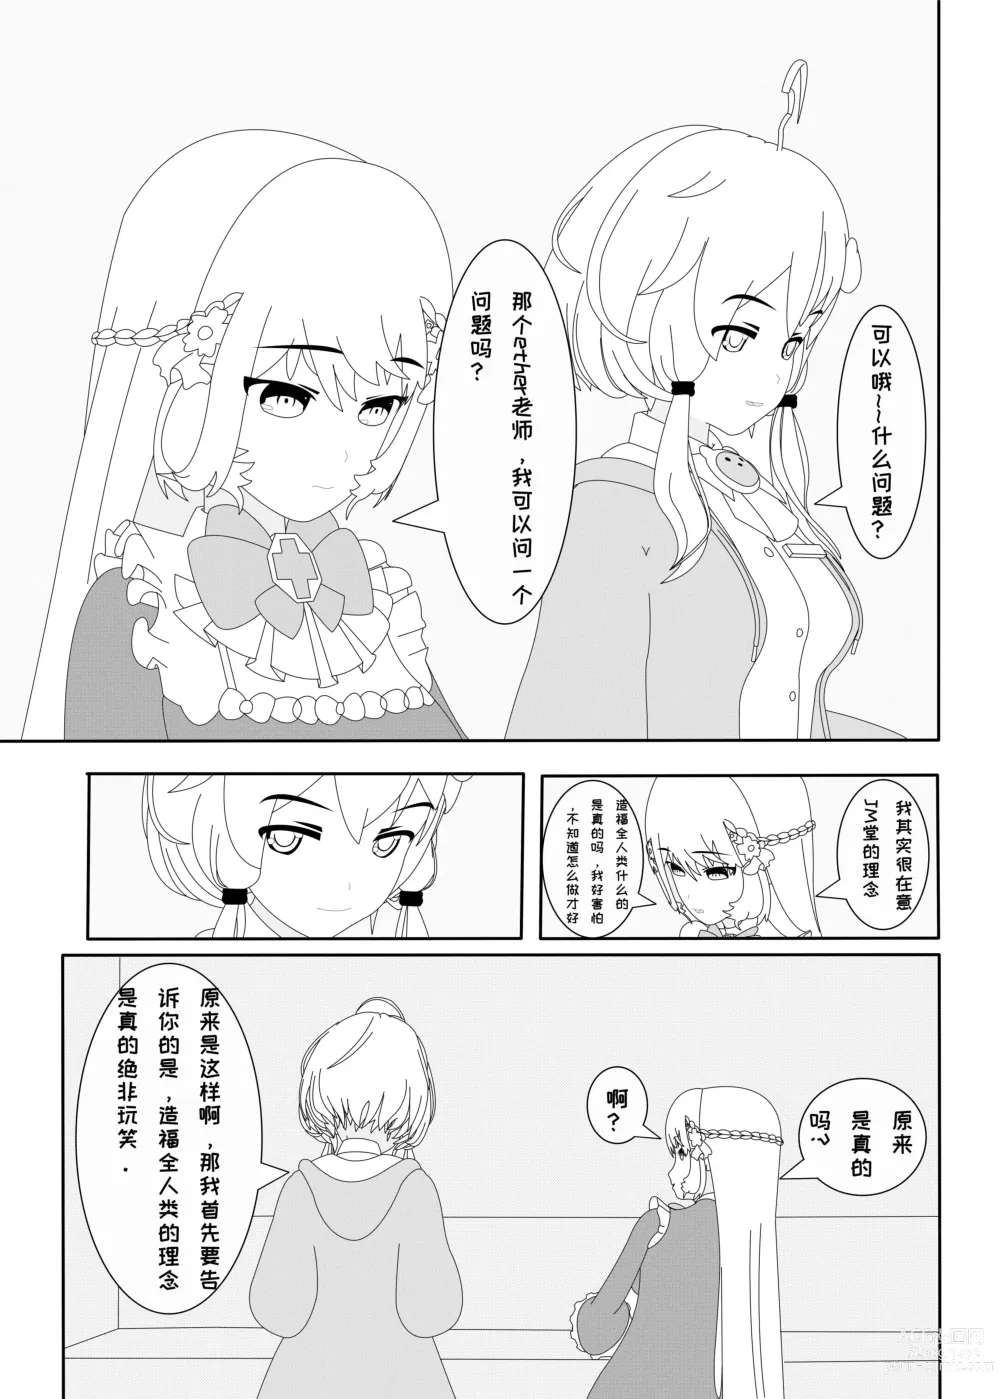 Page 9 of doujinshi 鲸之恋2（西丝特Xether）